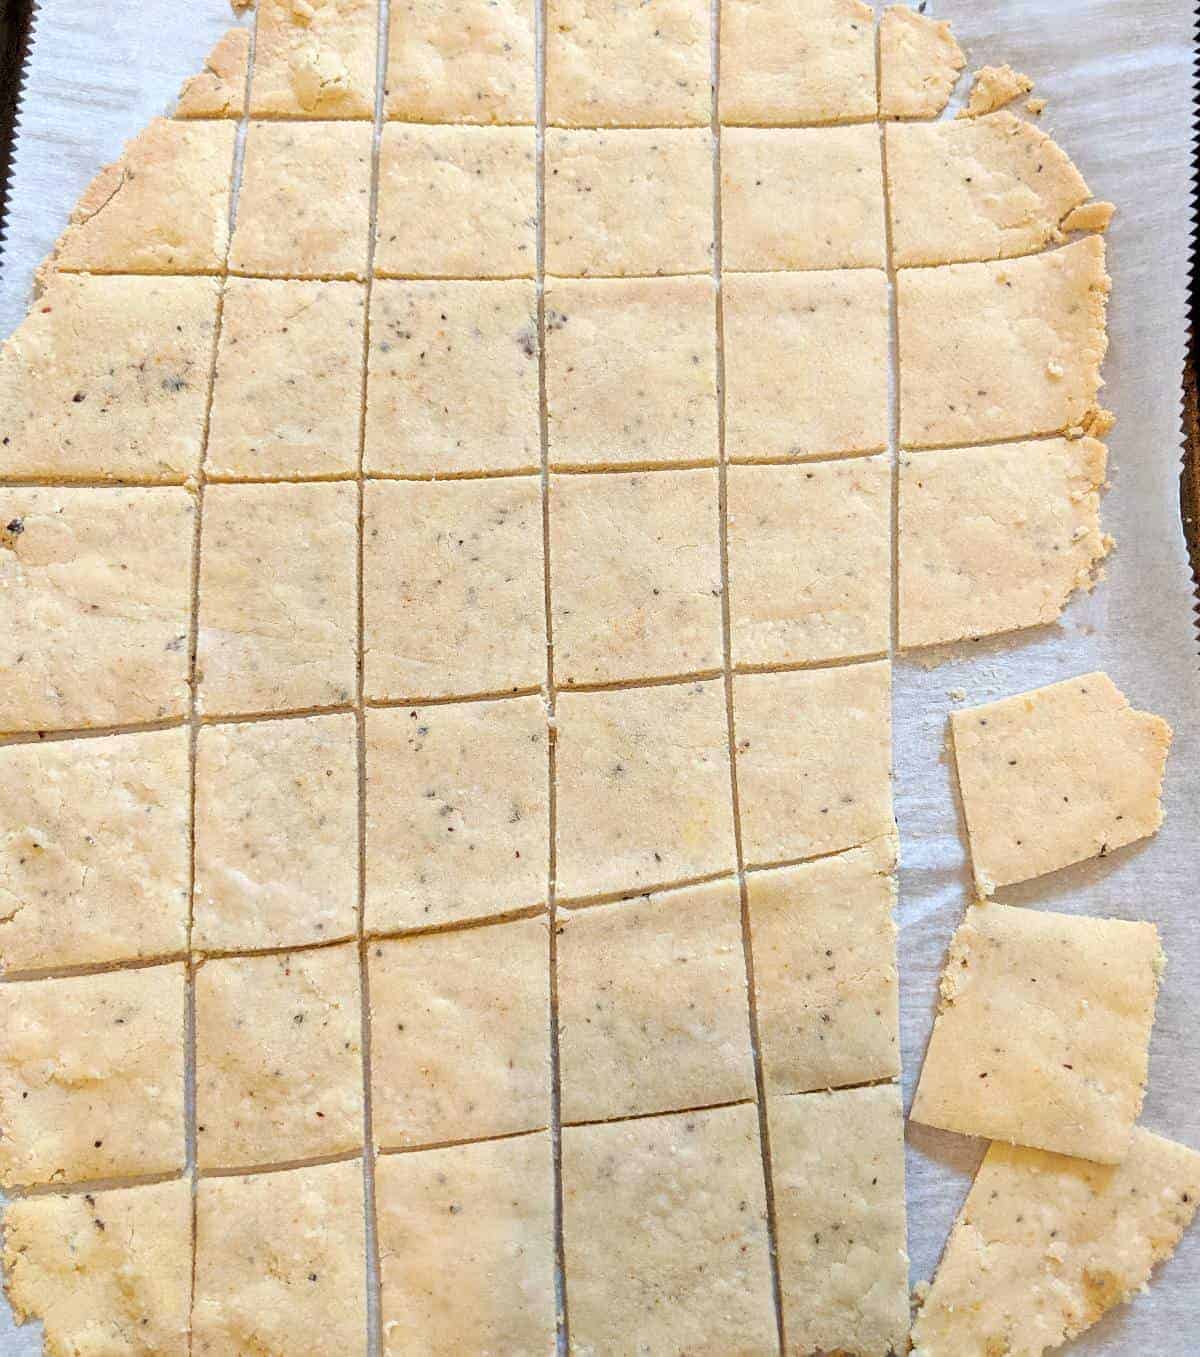 Overhead view of baked cracker sheet cut into individual crackers.